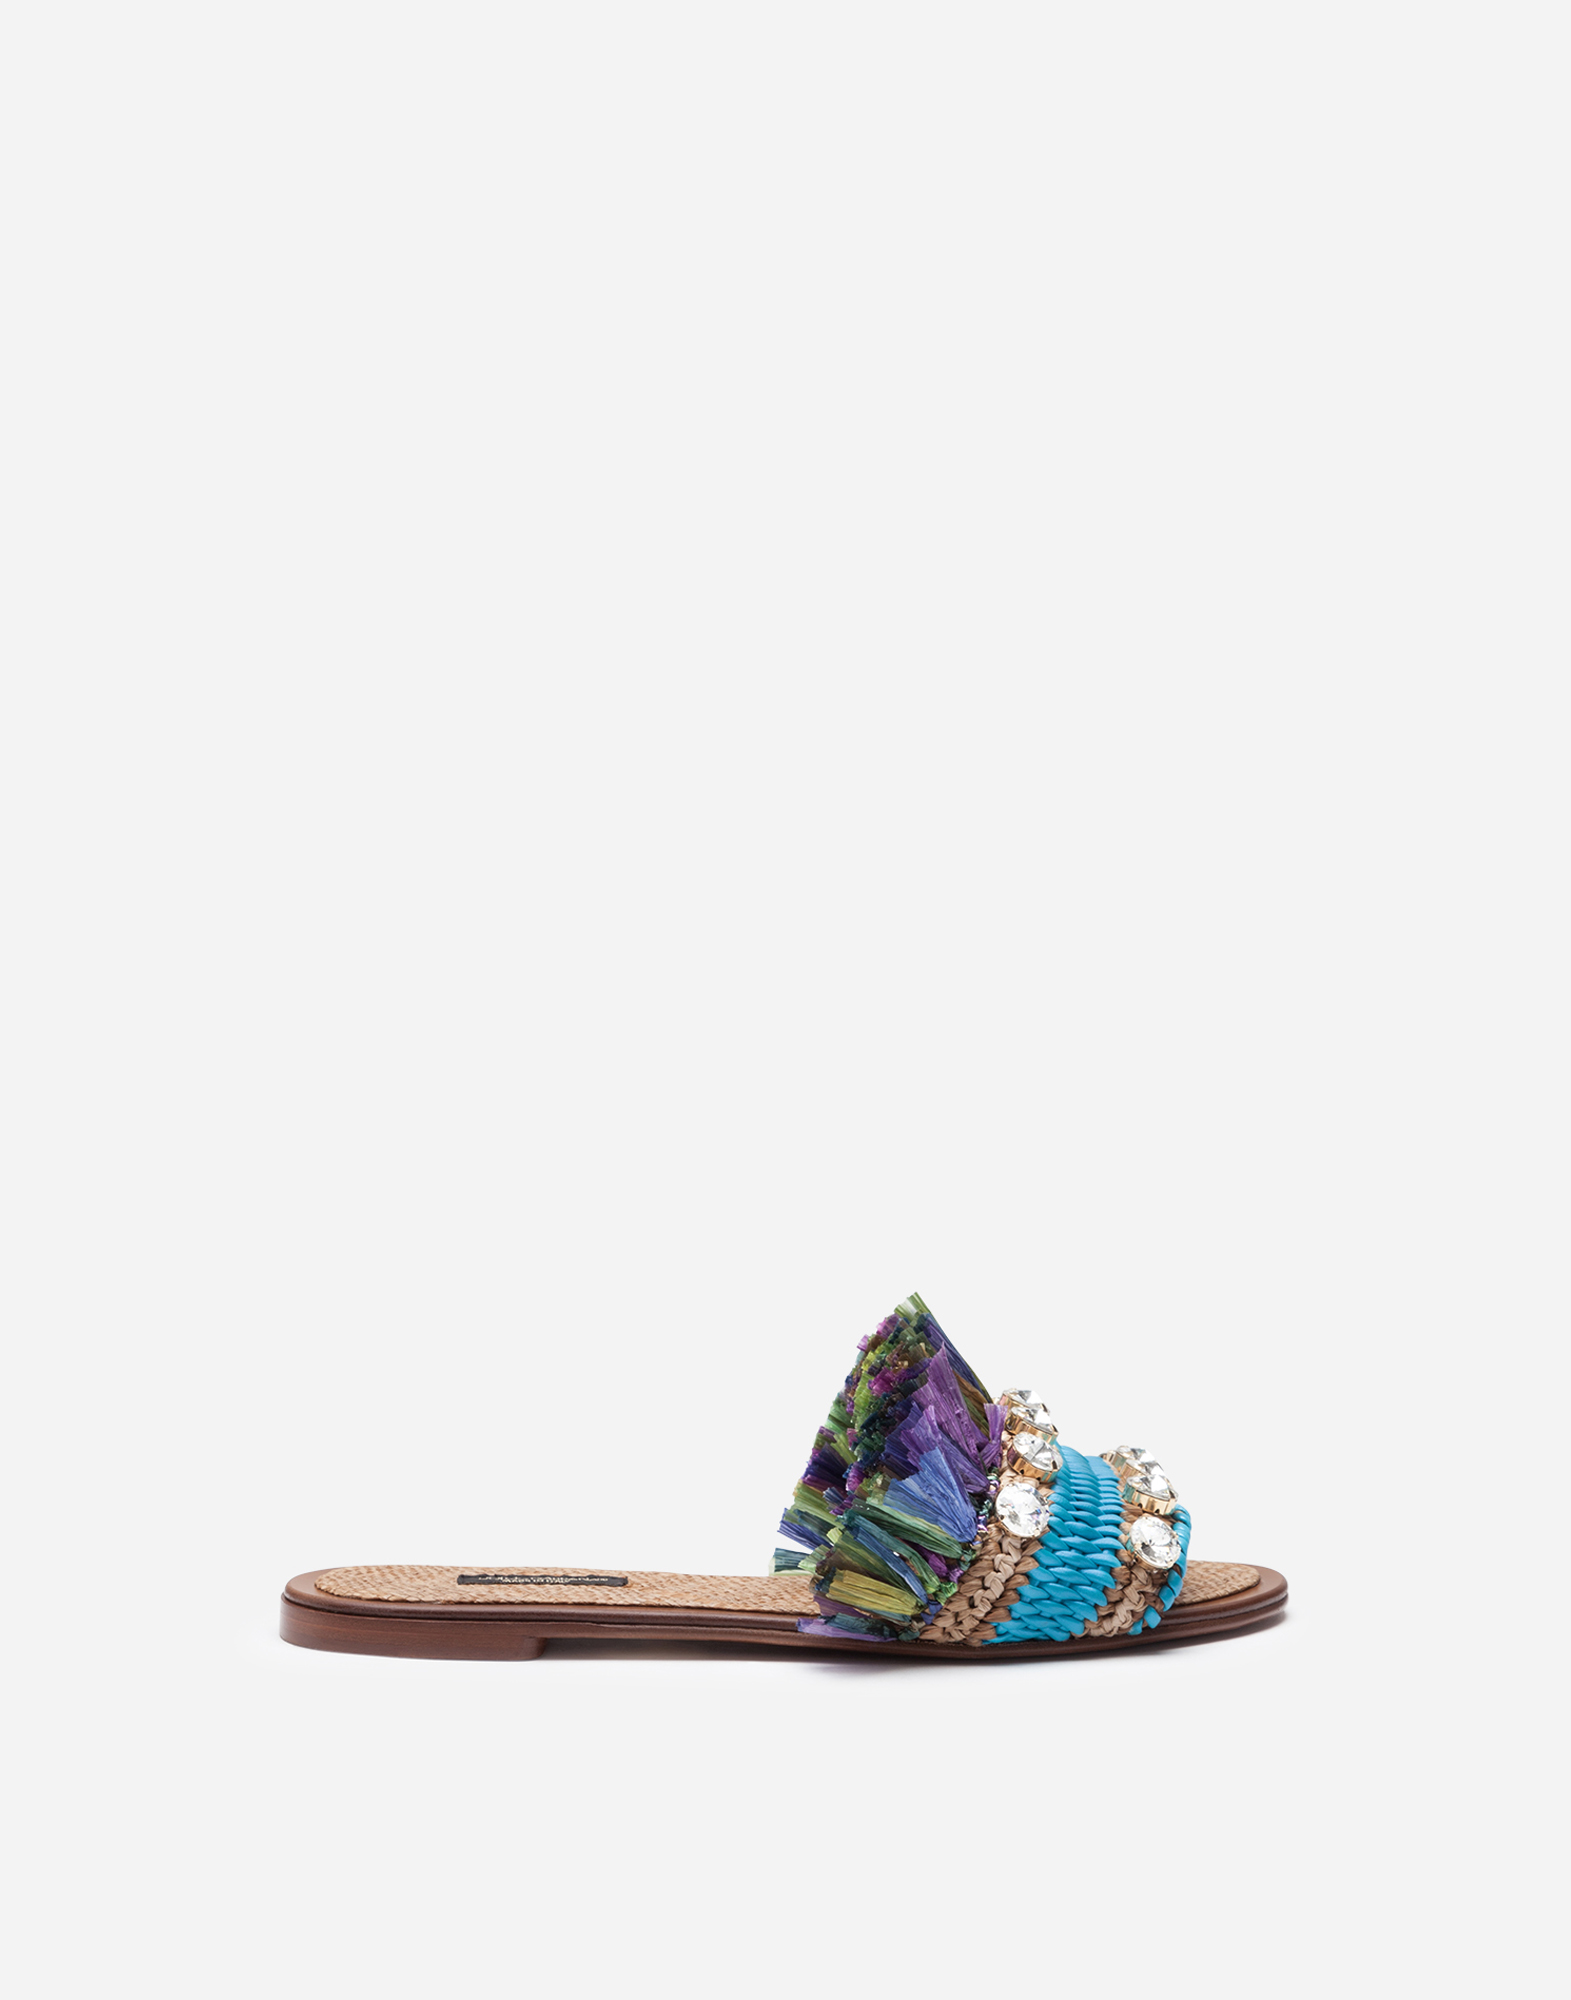 DOLCE & GABBANA SLIDERS IN STRAW WITH BEJEWELED EMBROIDERY